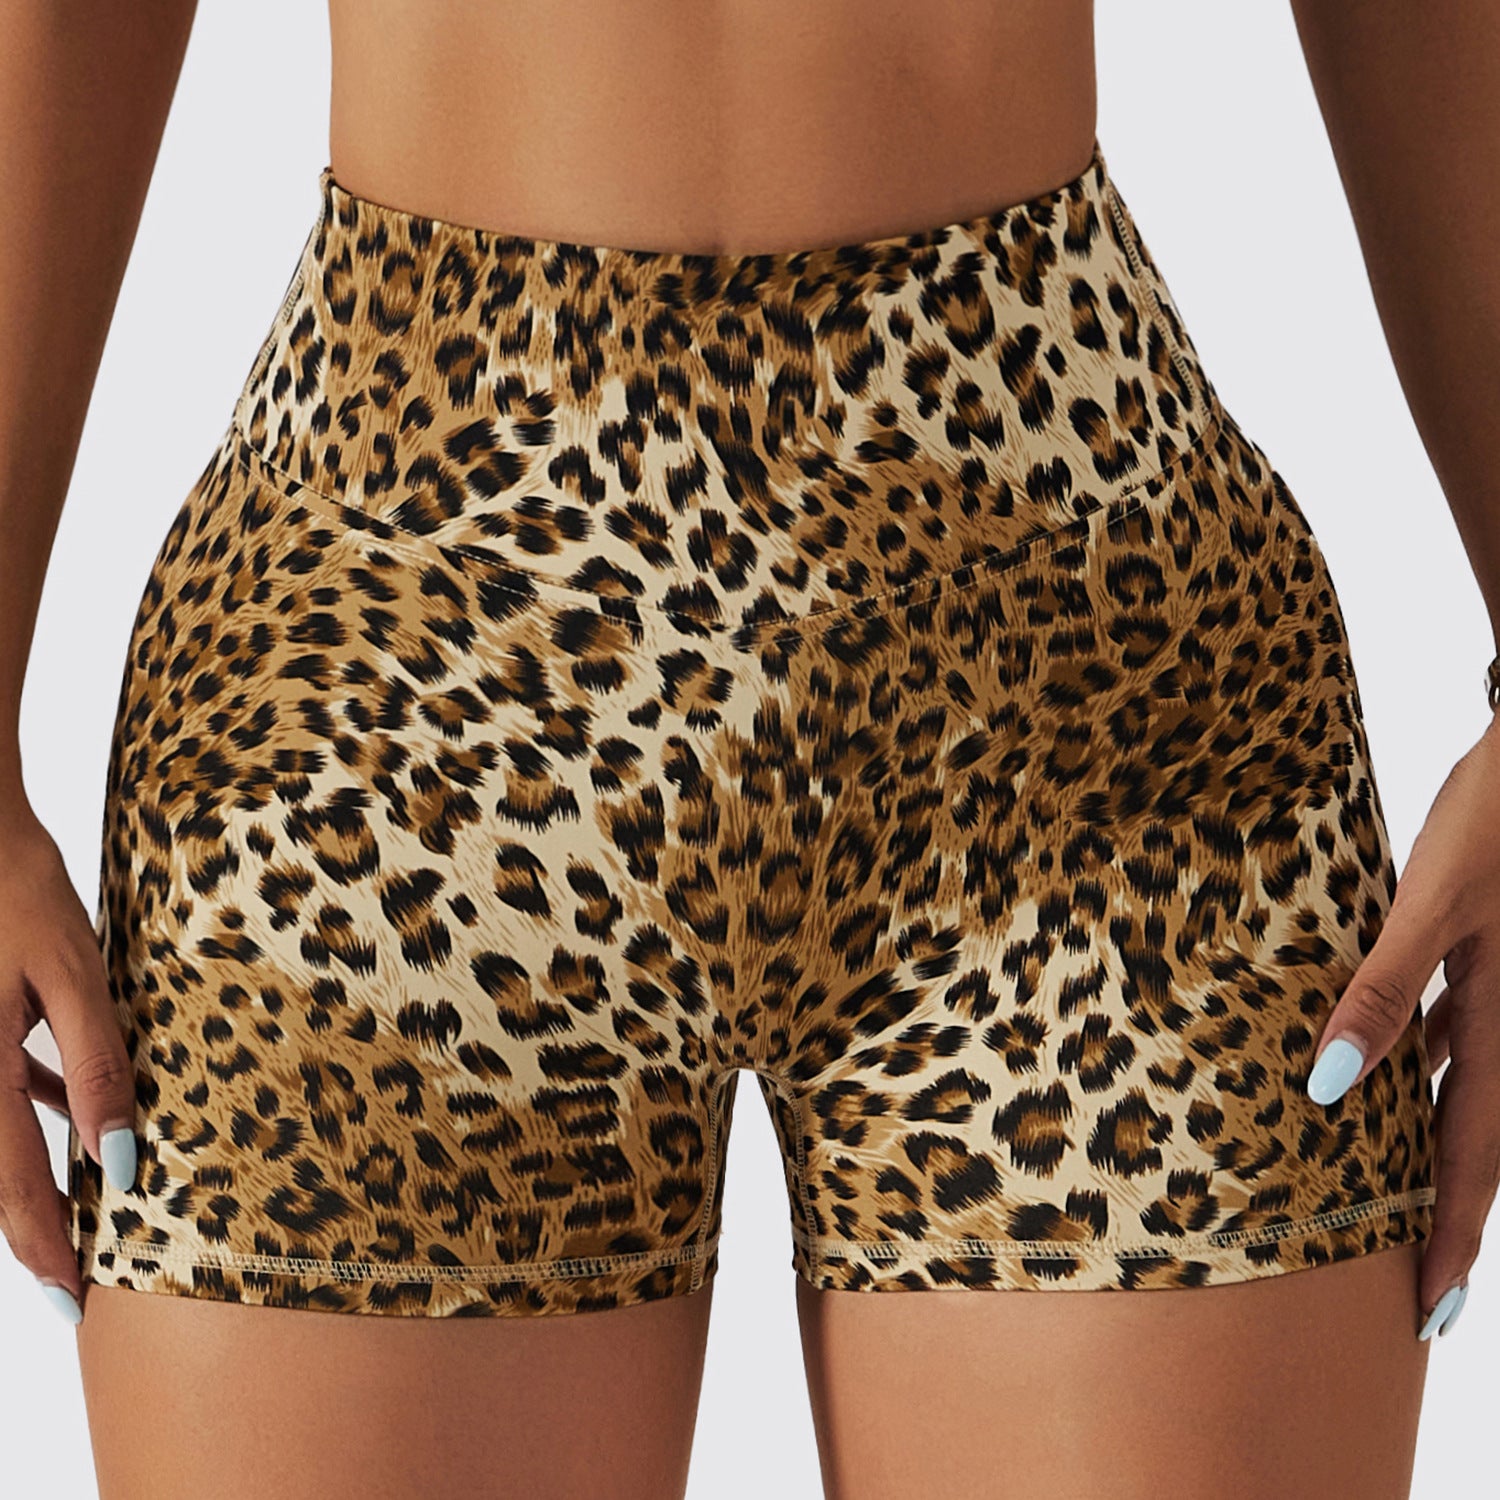 Leopard-print nude high-waisted shorts